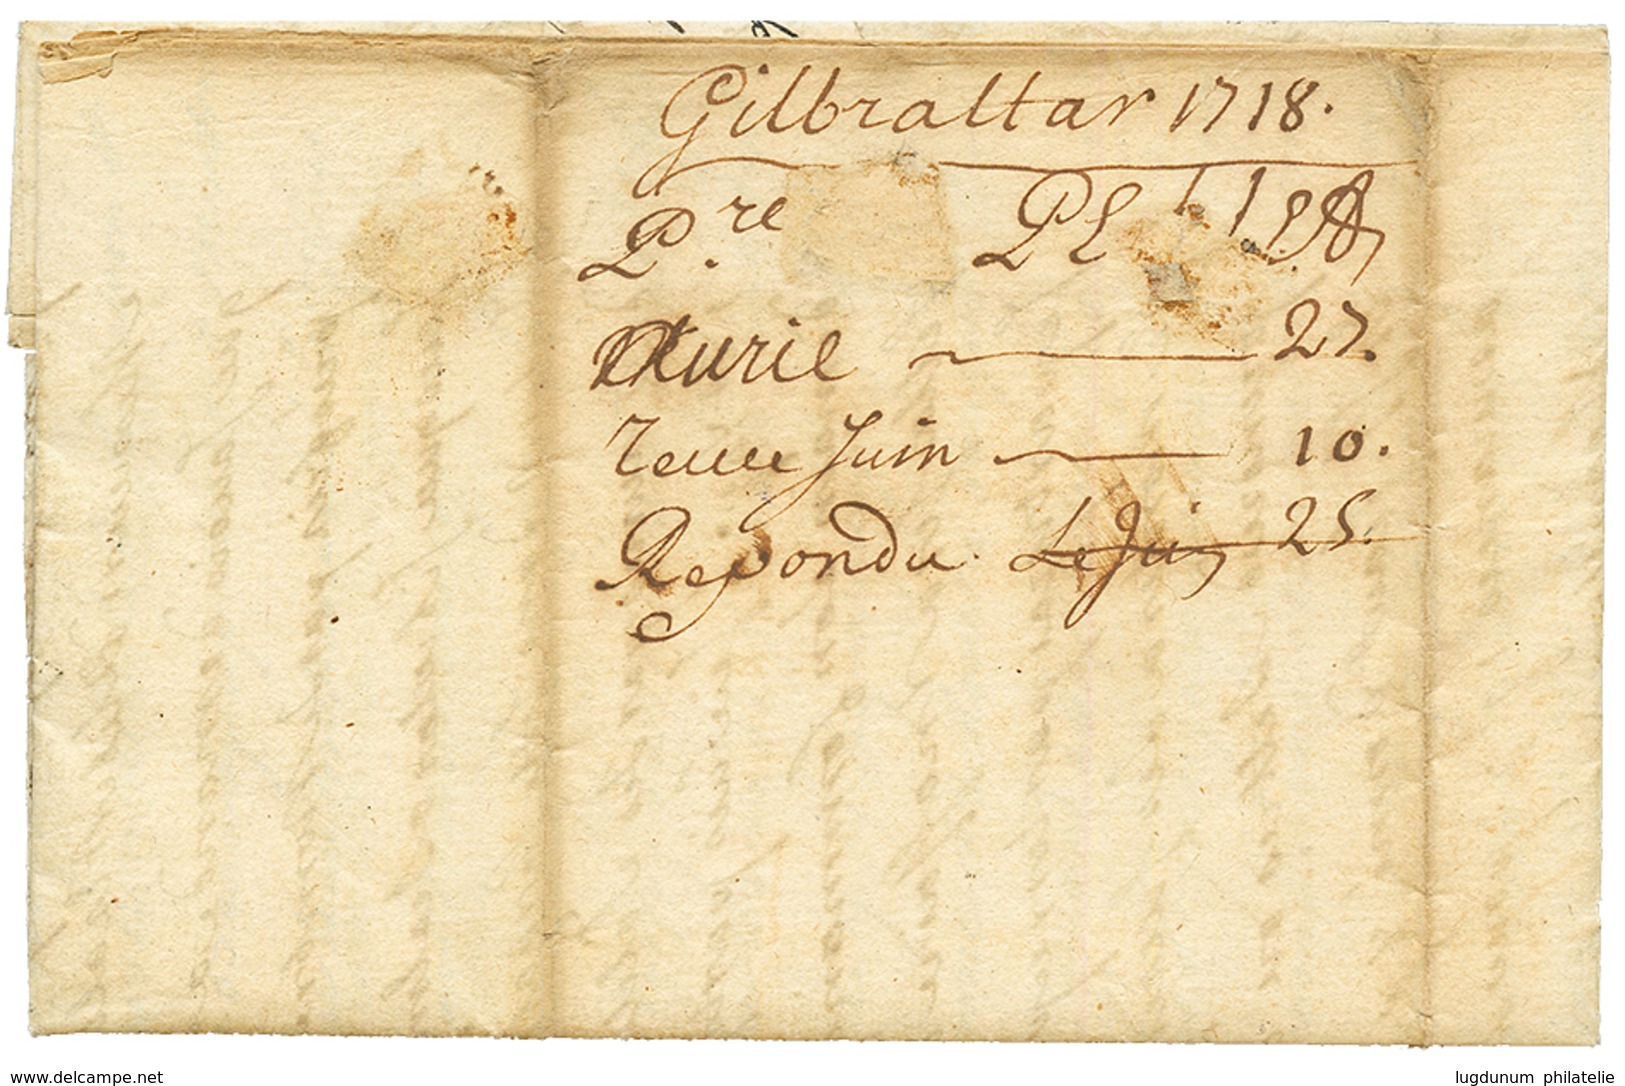 GIBRALTAR To MARTINIQUE : 1718 Entire Letter Datelined GIBRALTAR To MARTINIQUE. Scarce. Vvf. - Gibraltar